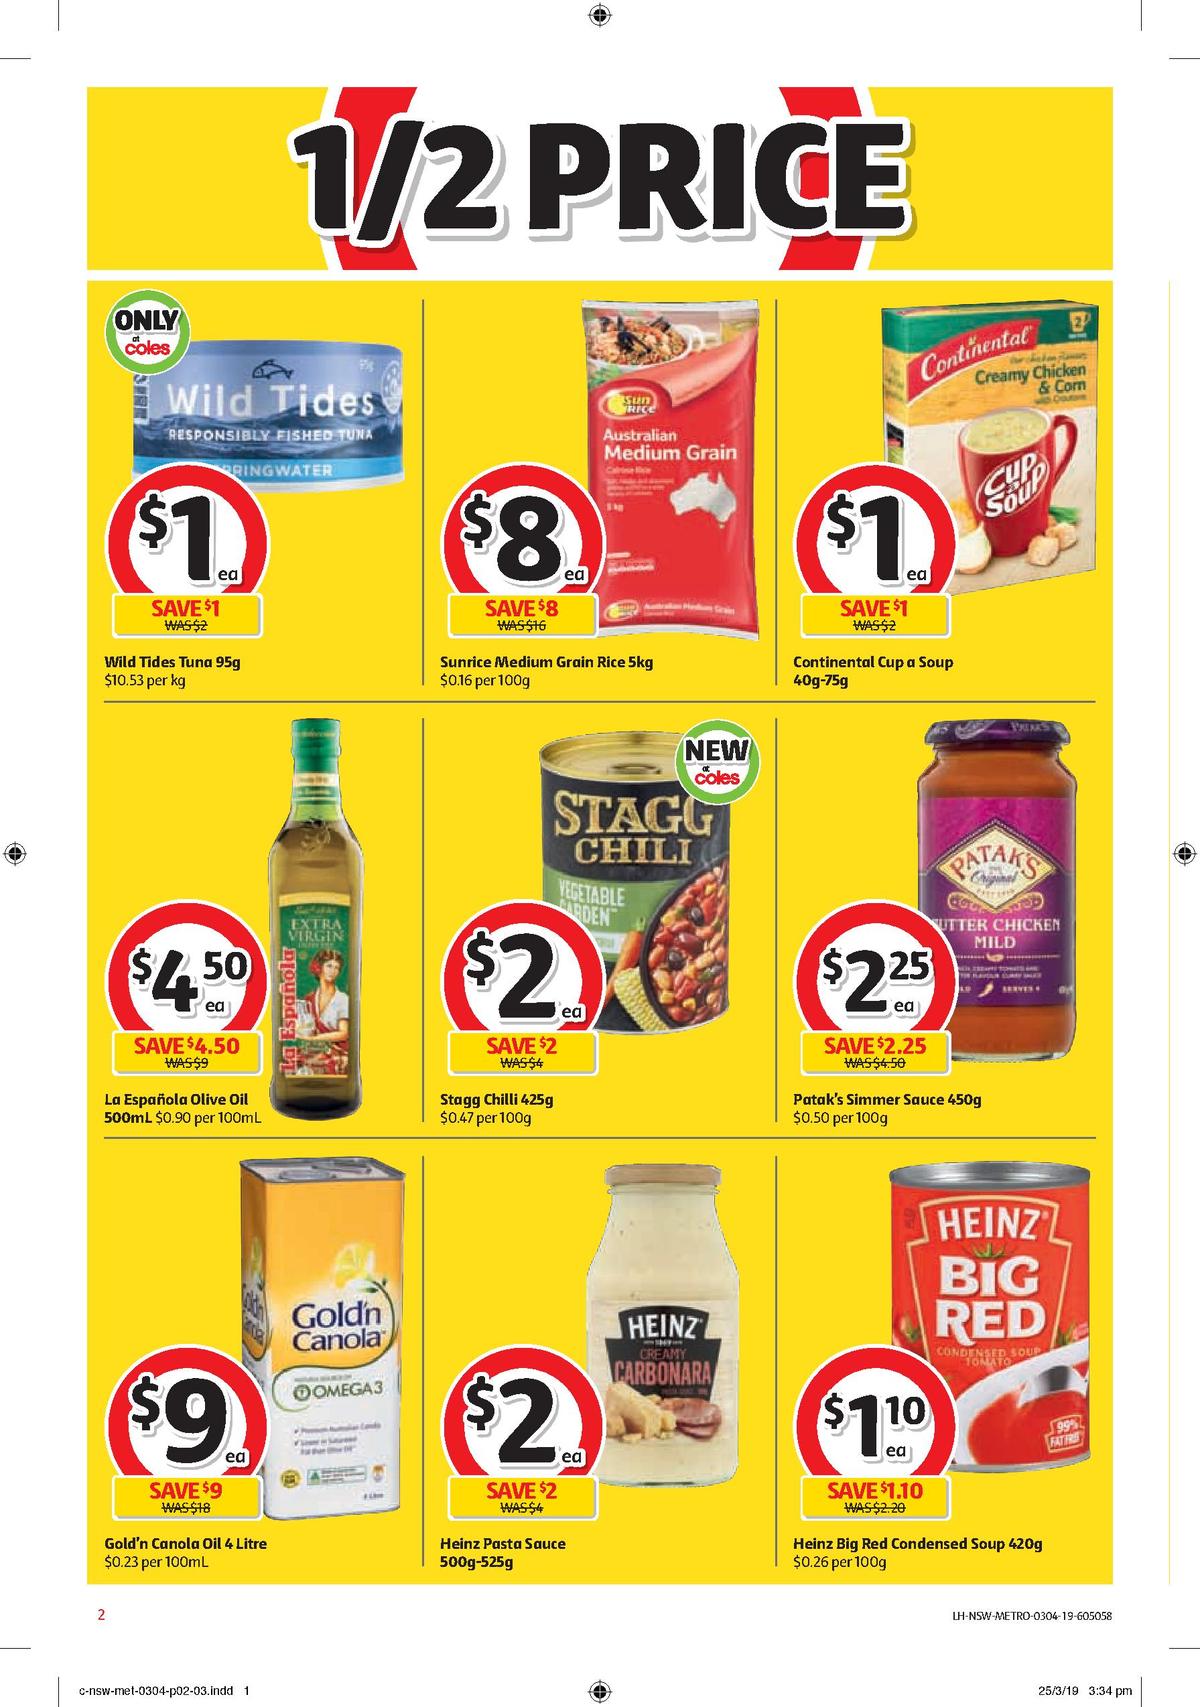 Coles Catalogues from 3 April